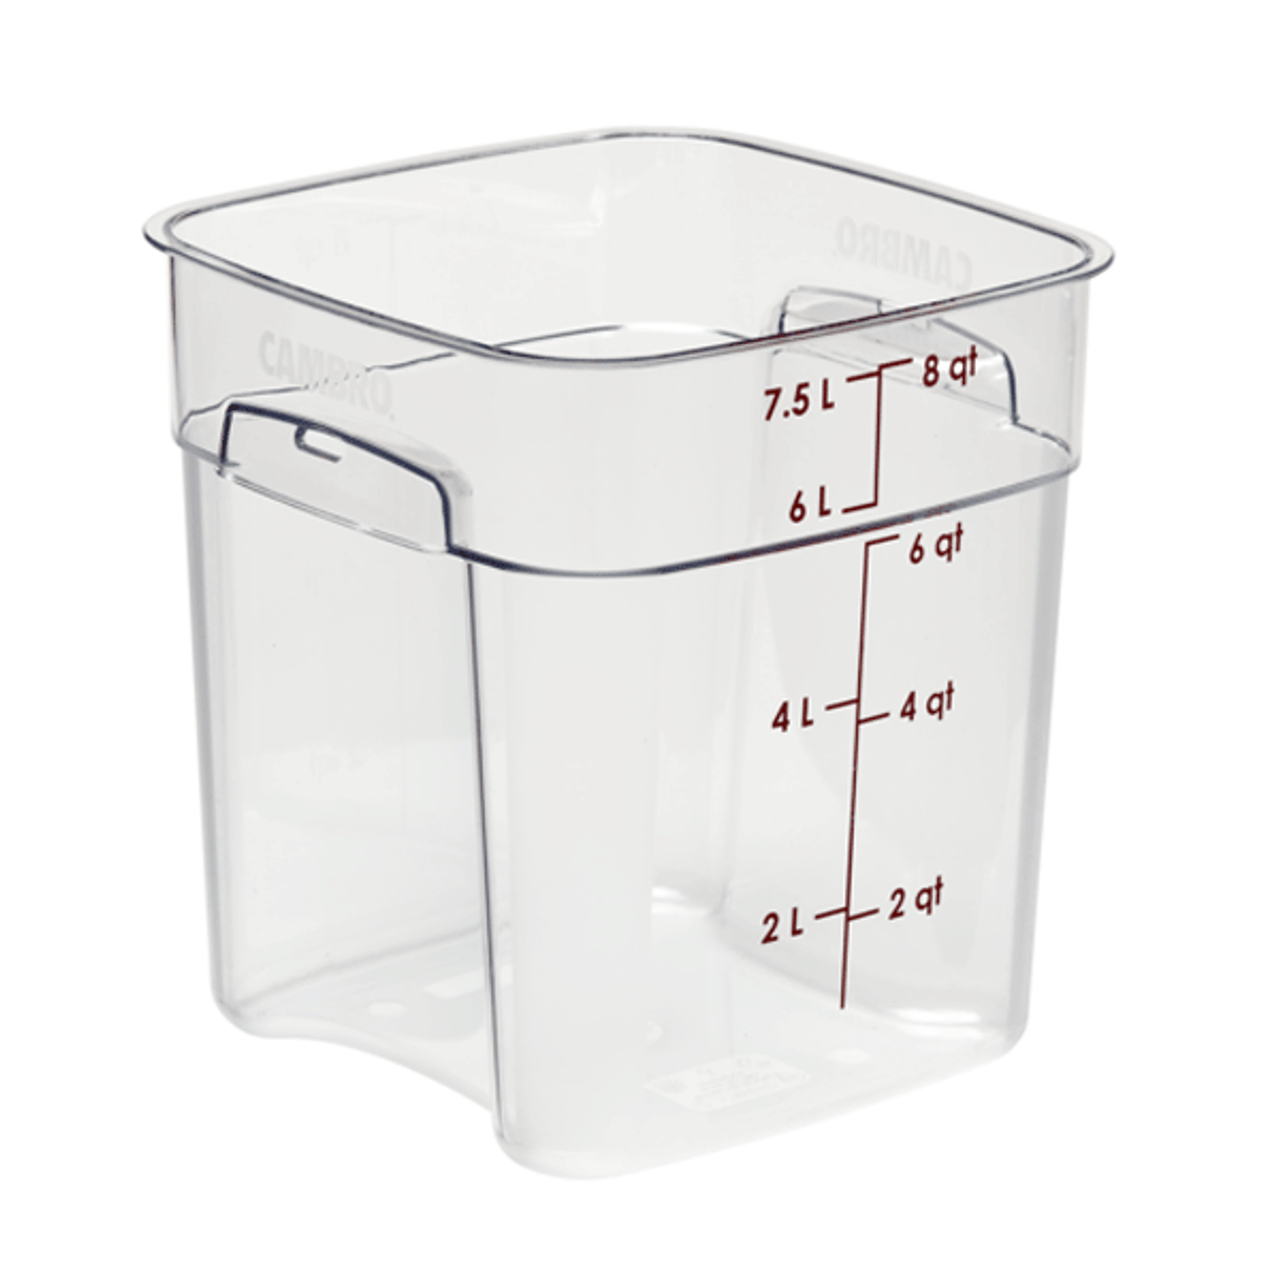 https://cdn11.bigcommerce.com/s-g3i86bef61/images/stencil/1280x1280/products/4506/4695/Cambro-8SFSPROCW135-FreshPro-8qt__40431.1680728273.png?c=1